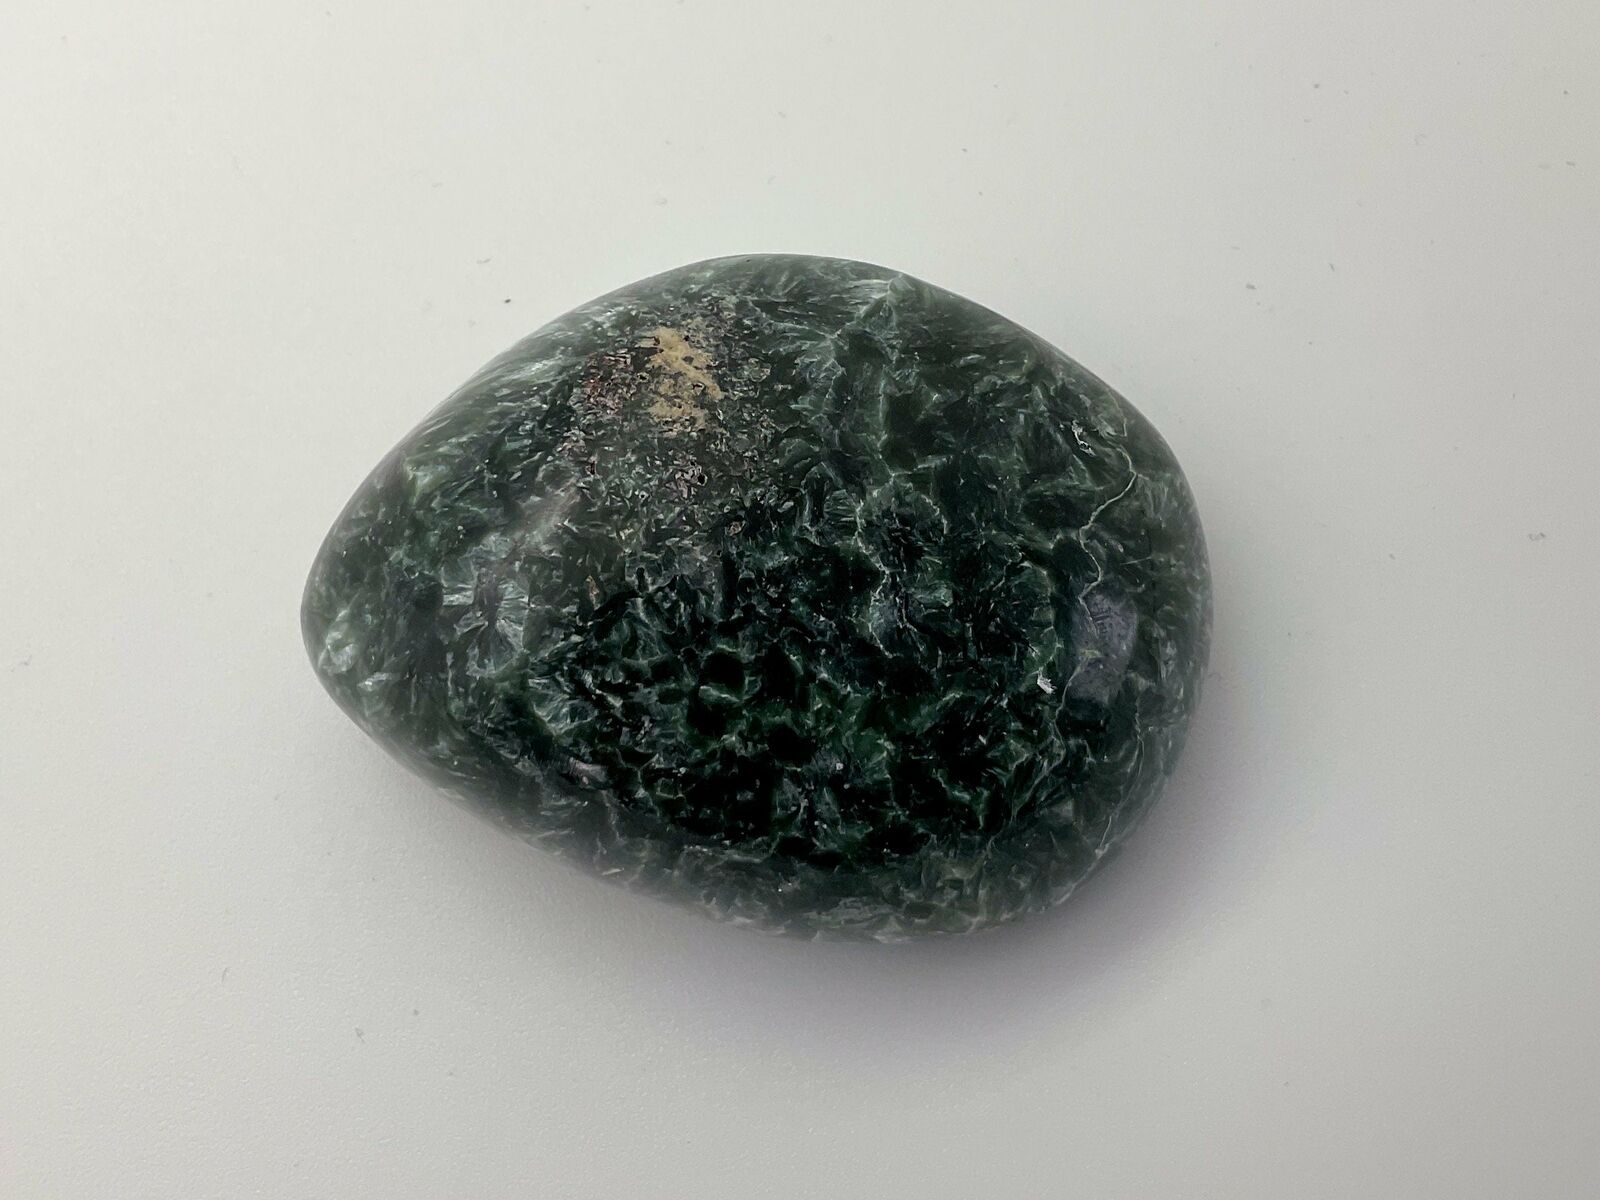 Gorgeous high quality Seraphinite palmstone from Russia